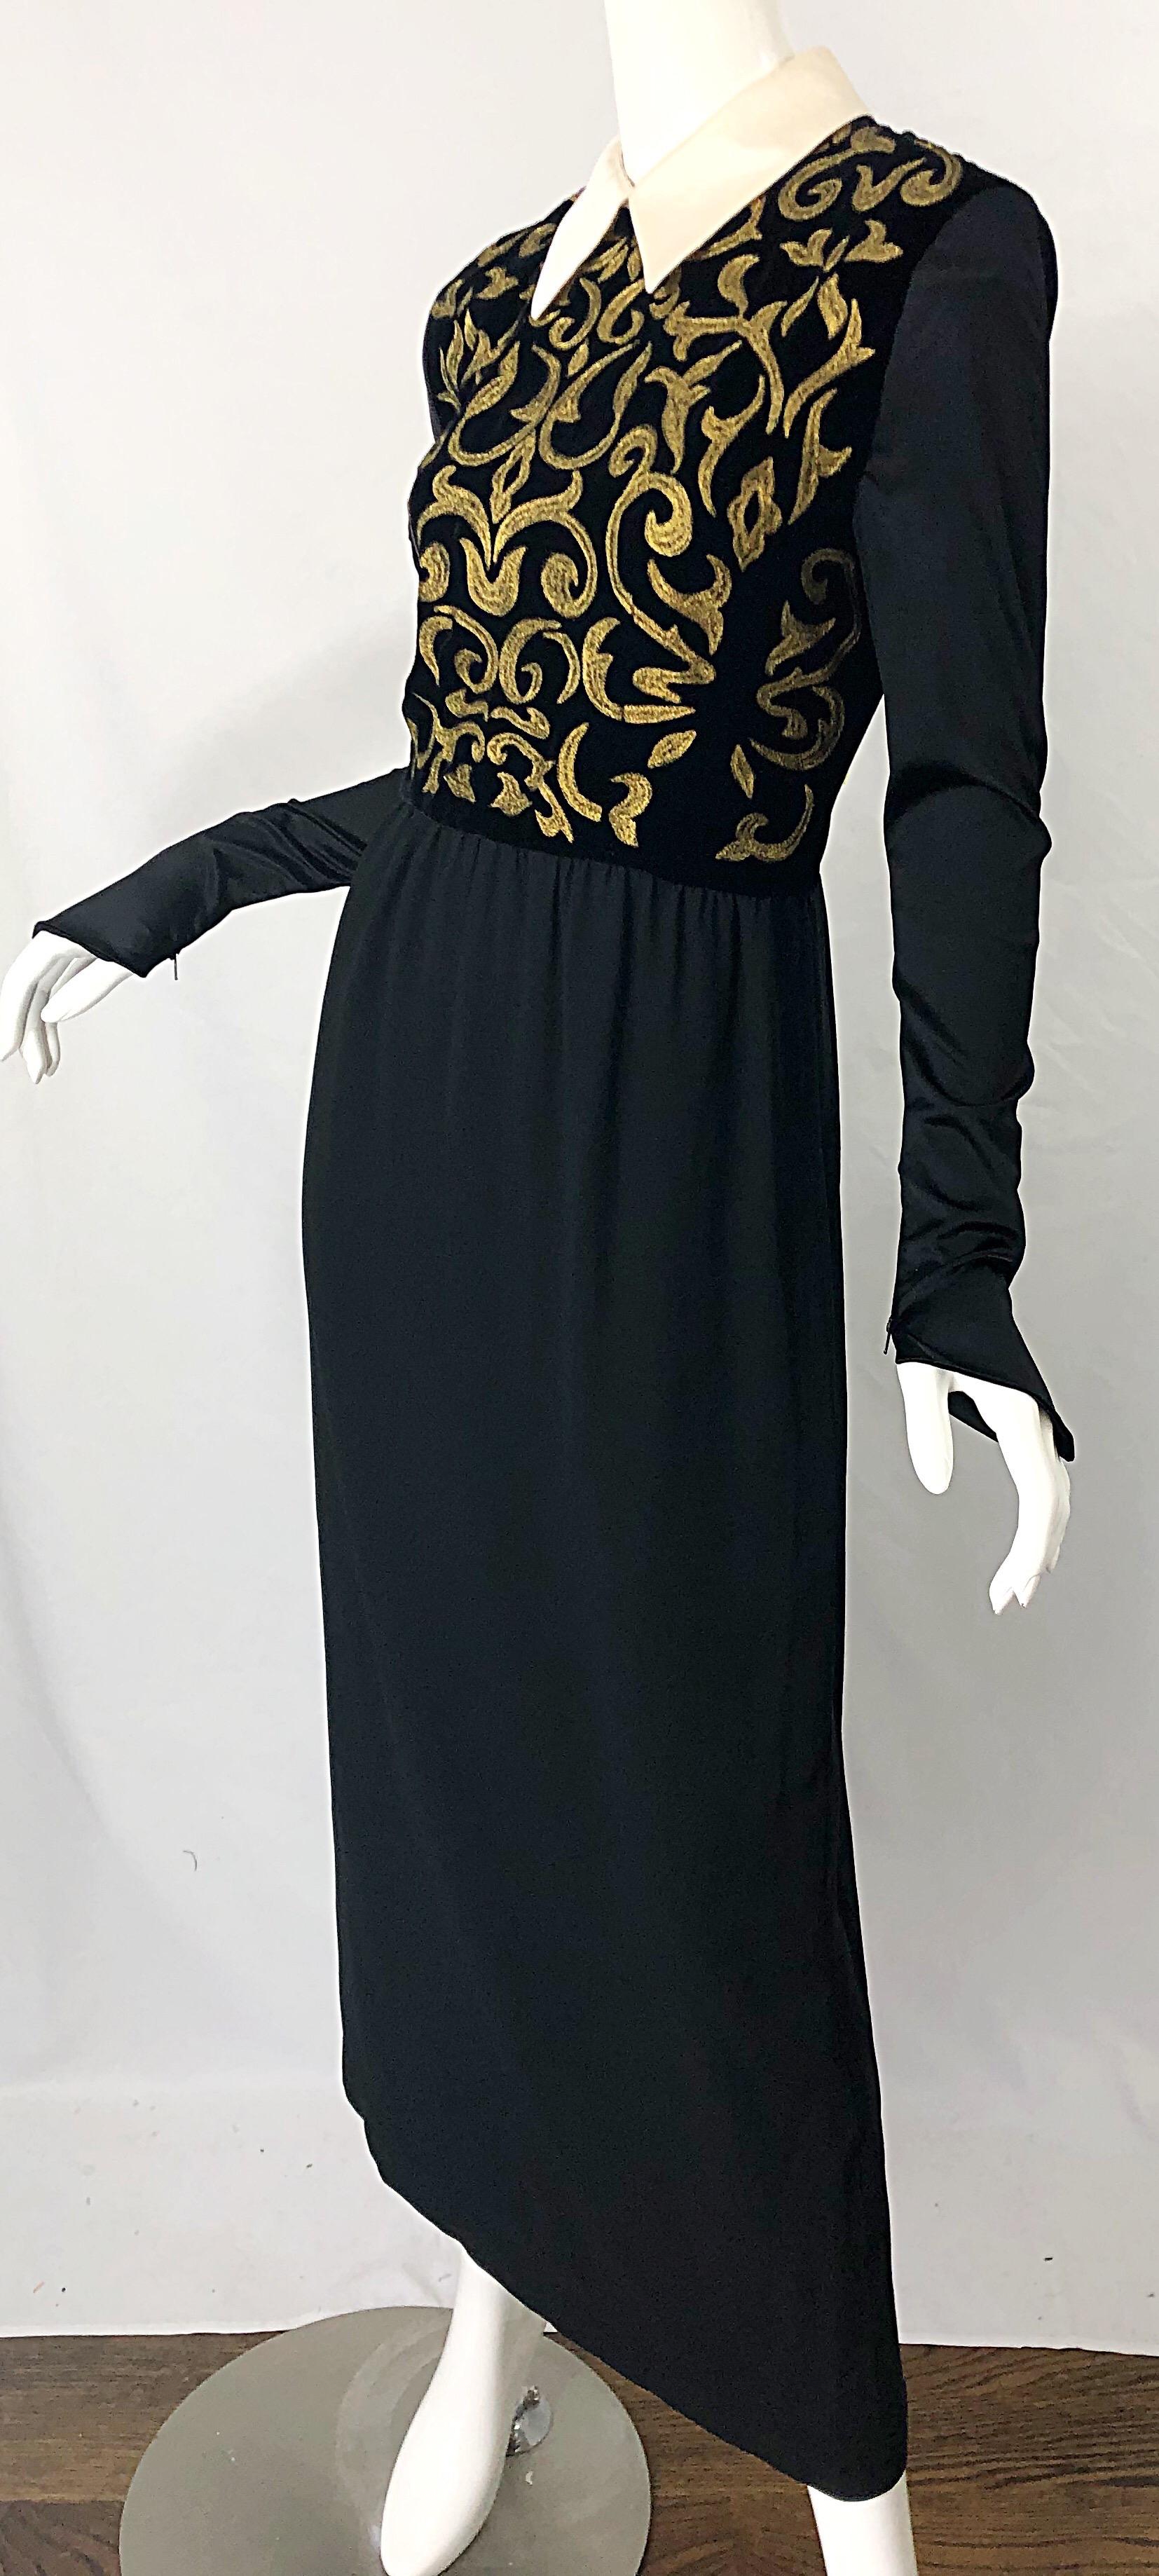 Karl Lagerfeld Runway Fall 1988 Black Gold Embroidered Vintage 80s Gown Dress For Sale 7